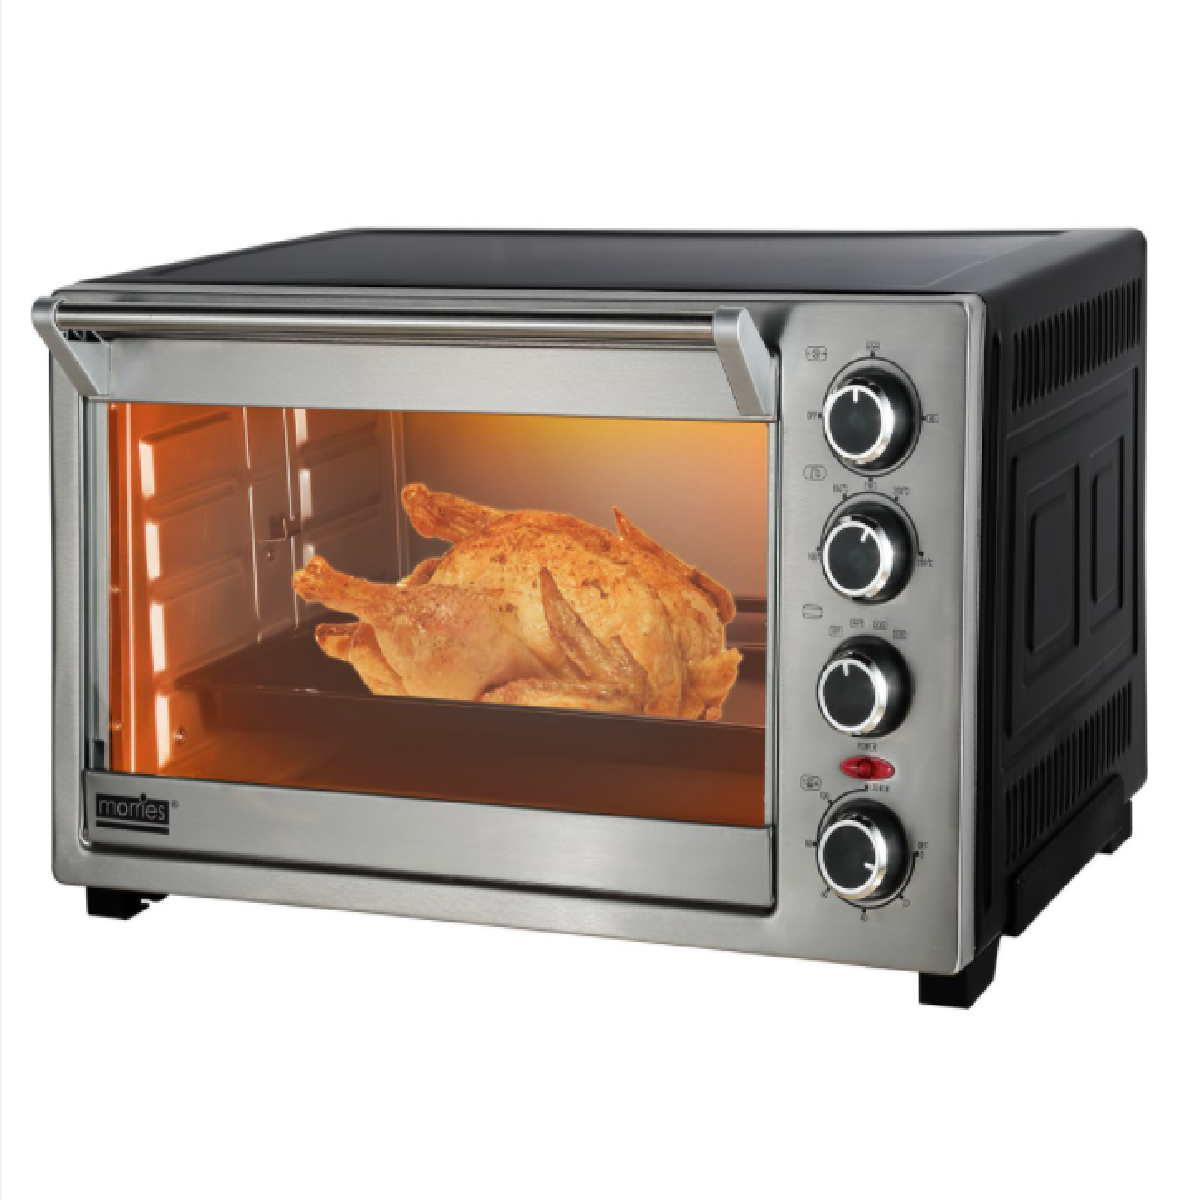 Morries MS-450EOV 45L Electric Oven